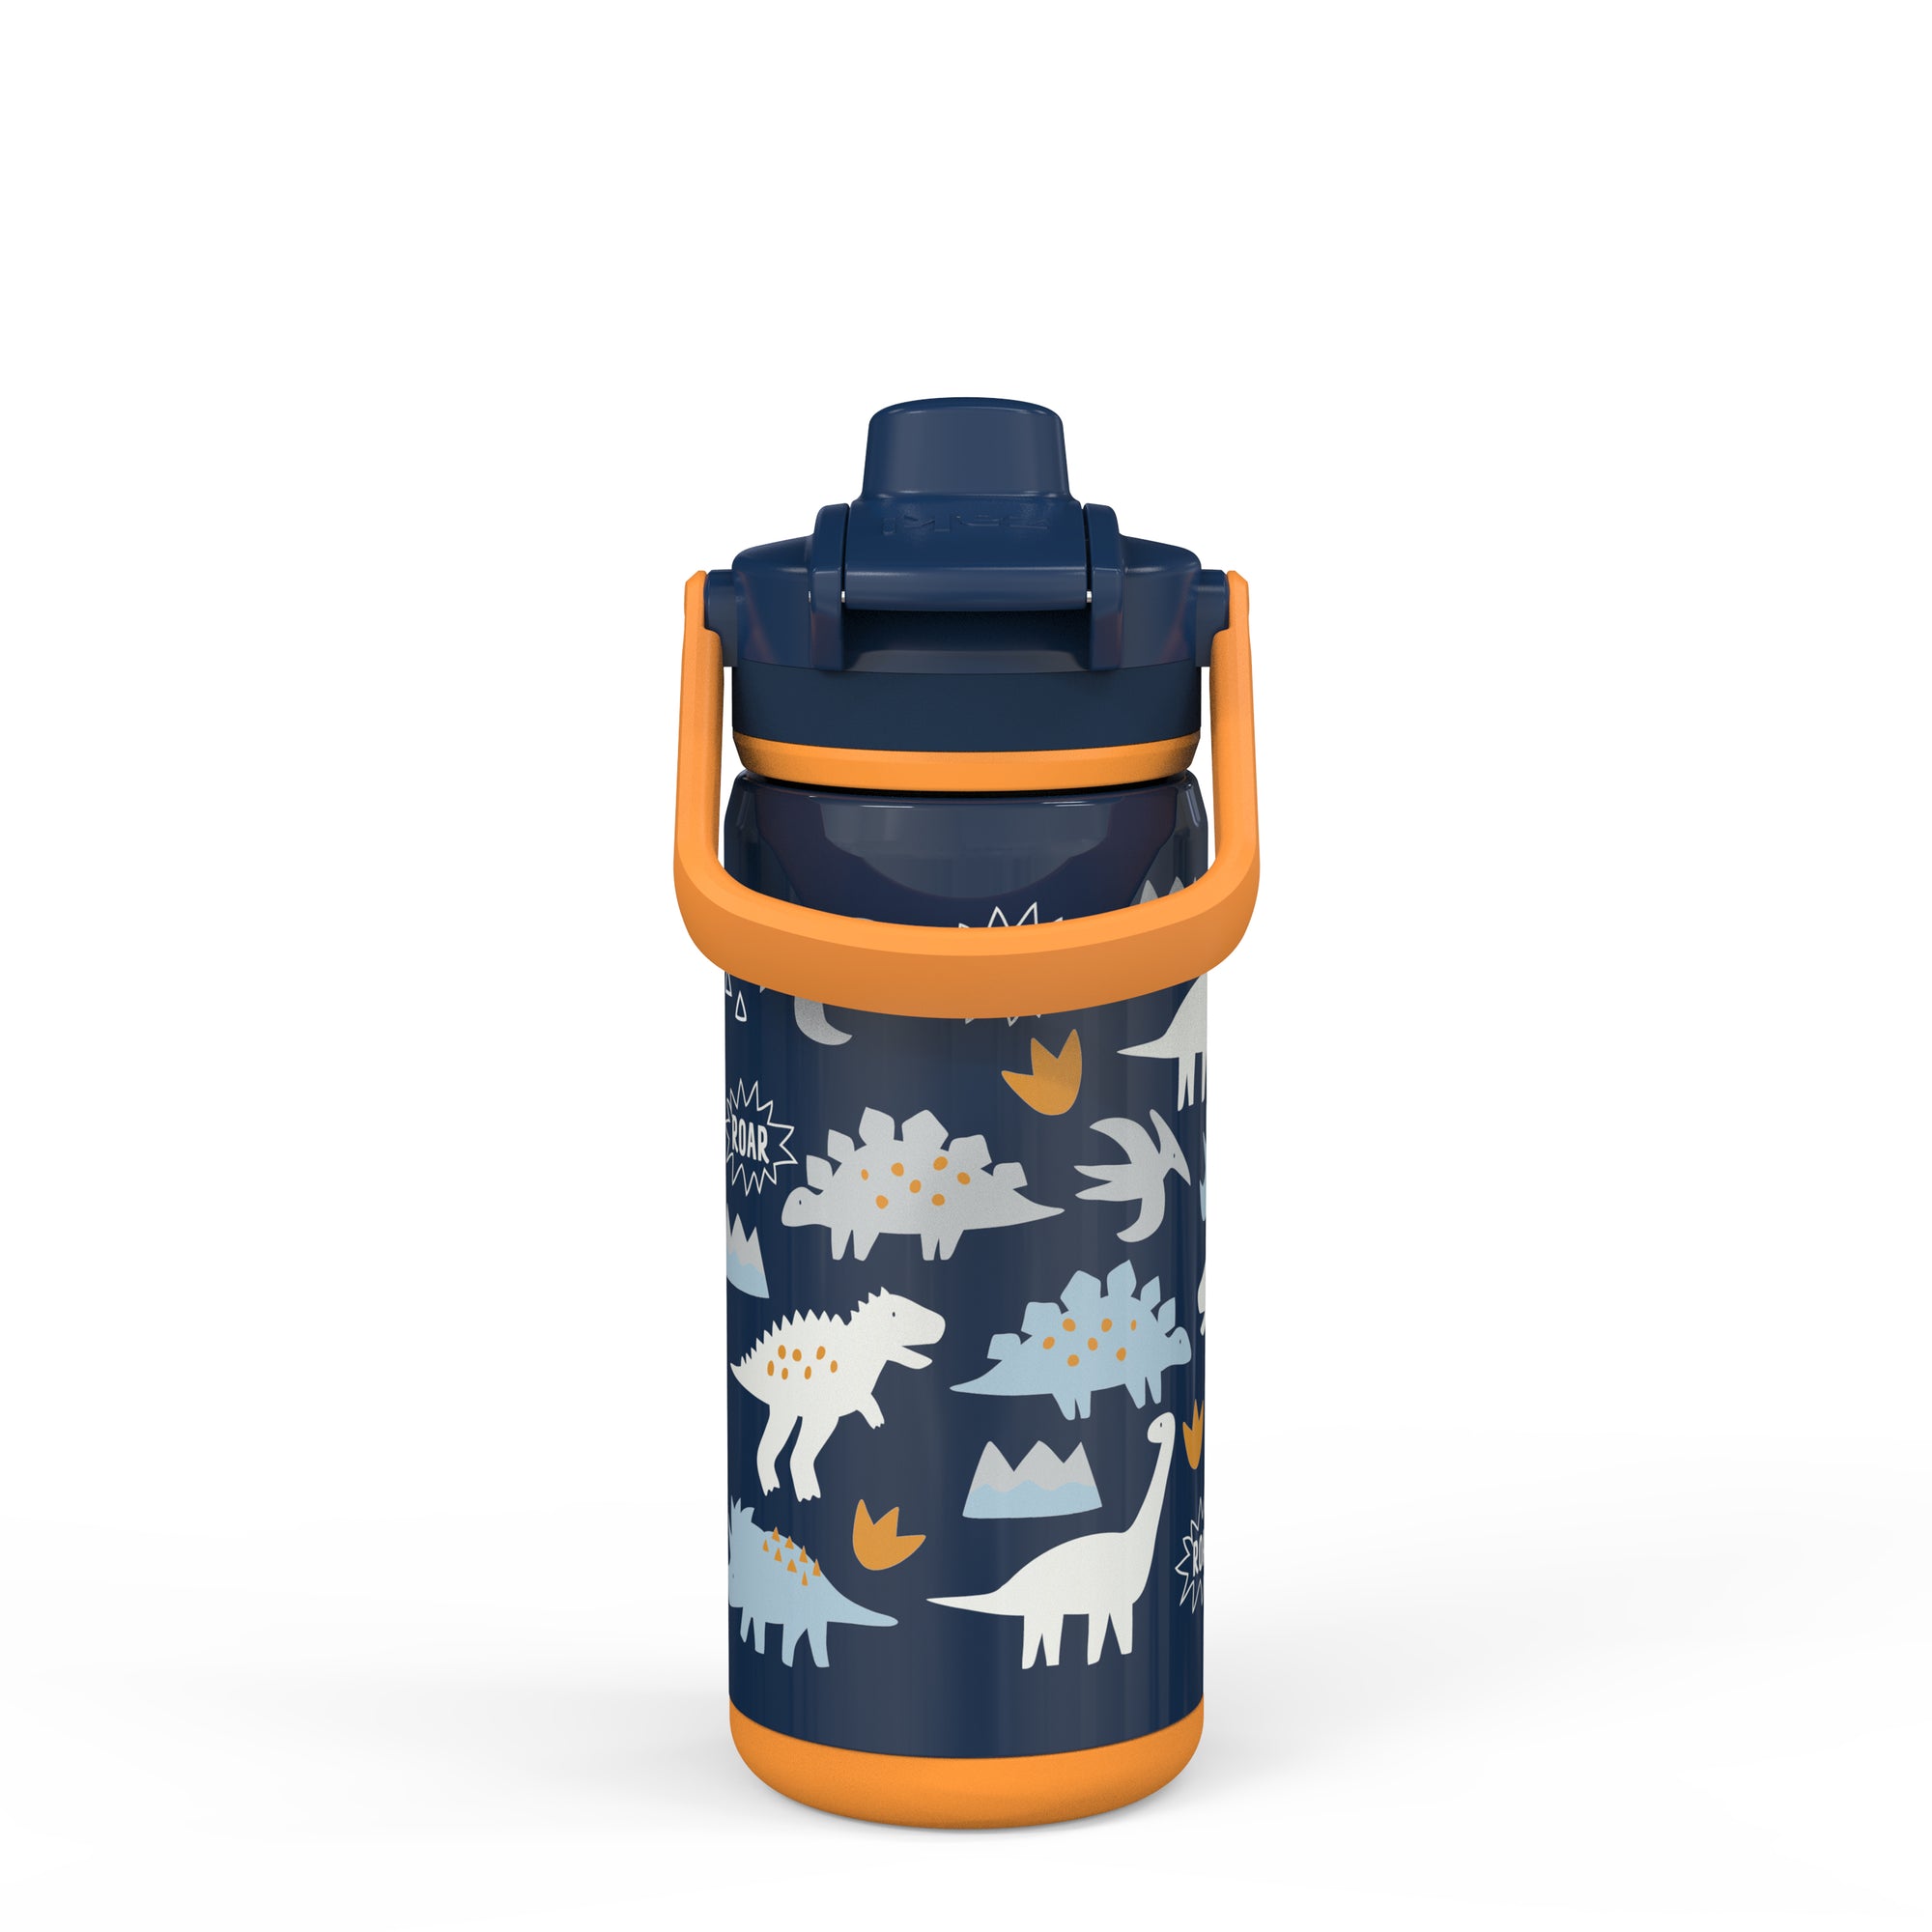 Beacon Stainless Steel Insulated Kids Water Bottle with Covered Spout - Zaksaurus, 14 Ounces